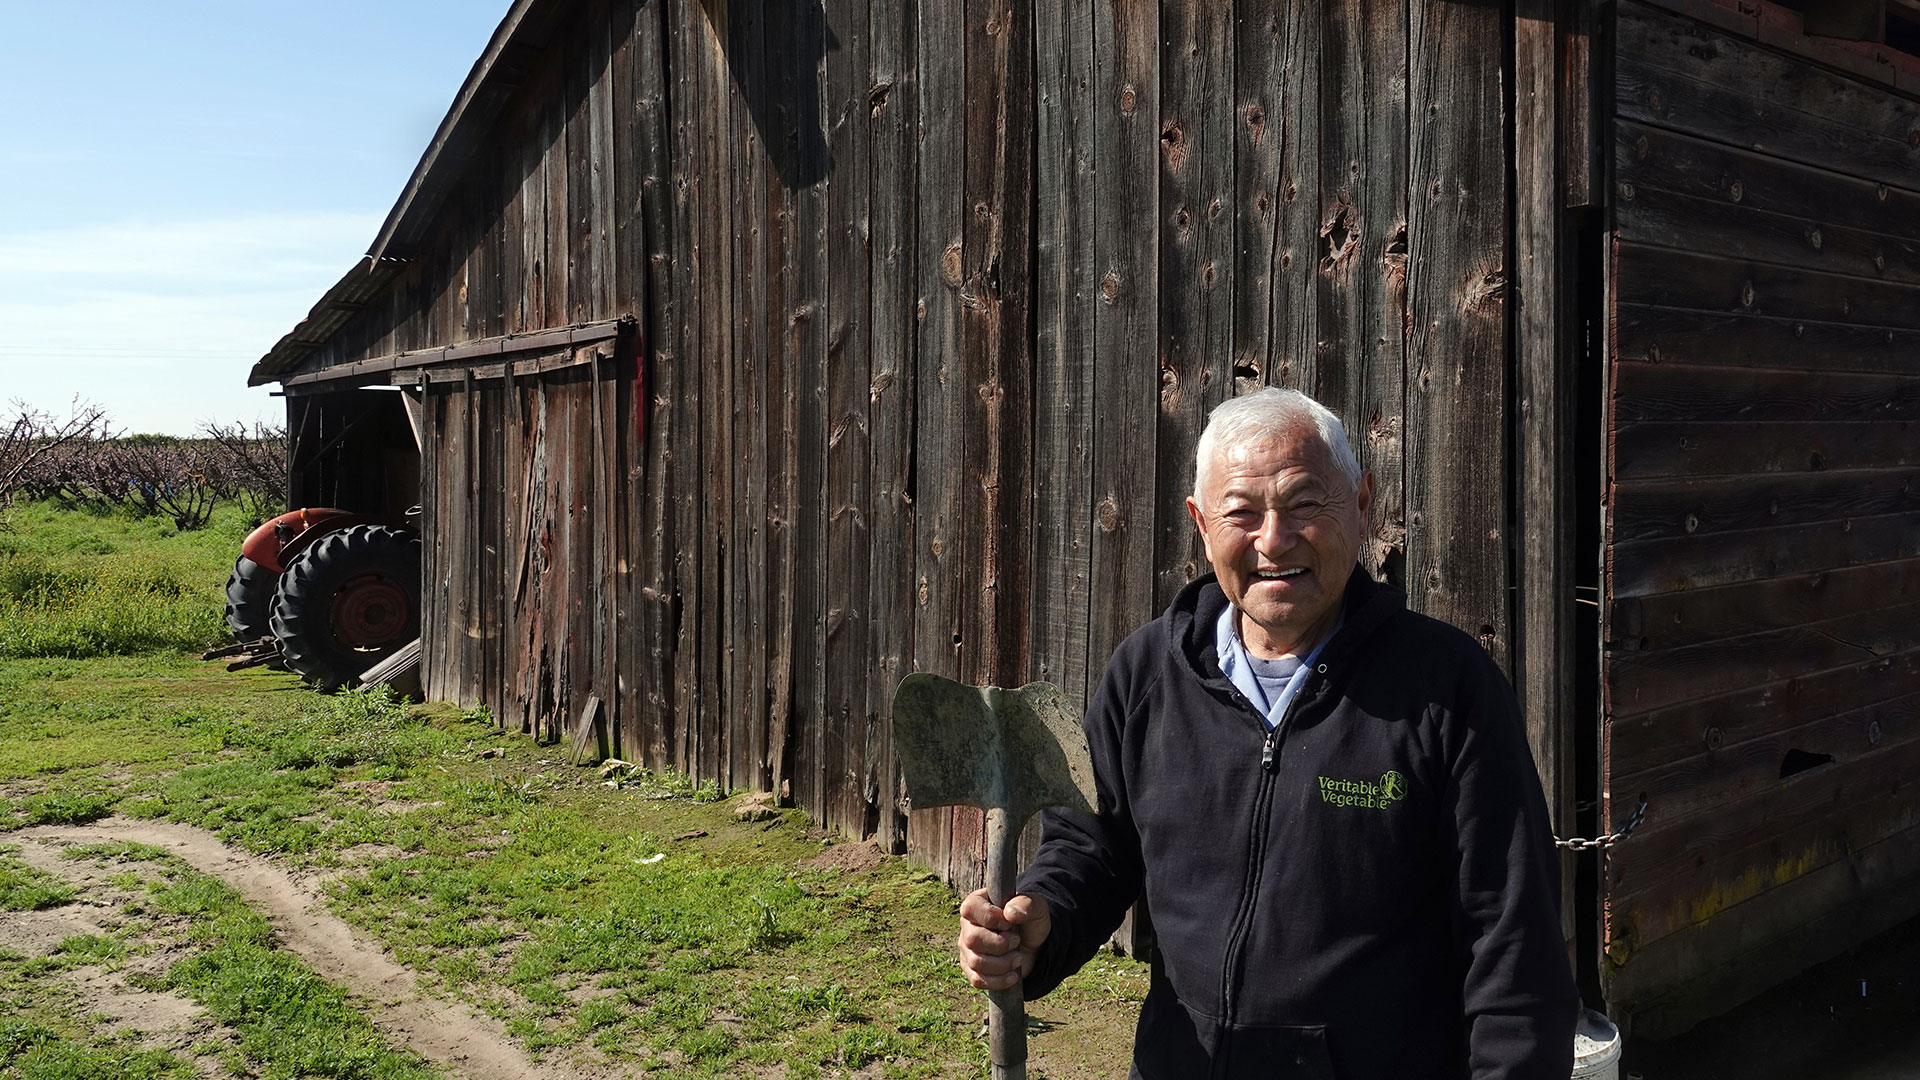 A Japanese American man with white hair and a black zip-up sweatshirt stands in front of a weathered wood barn holding a shovel. He is smiling broadly.